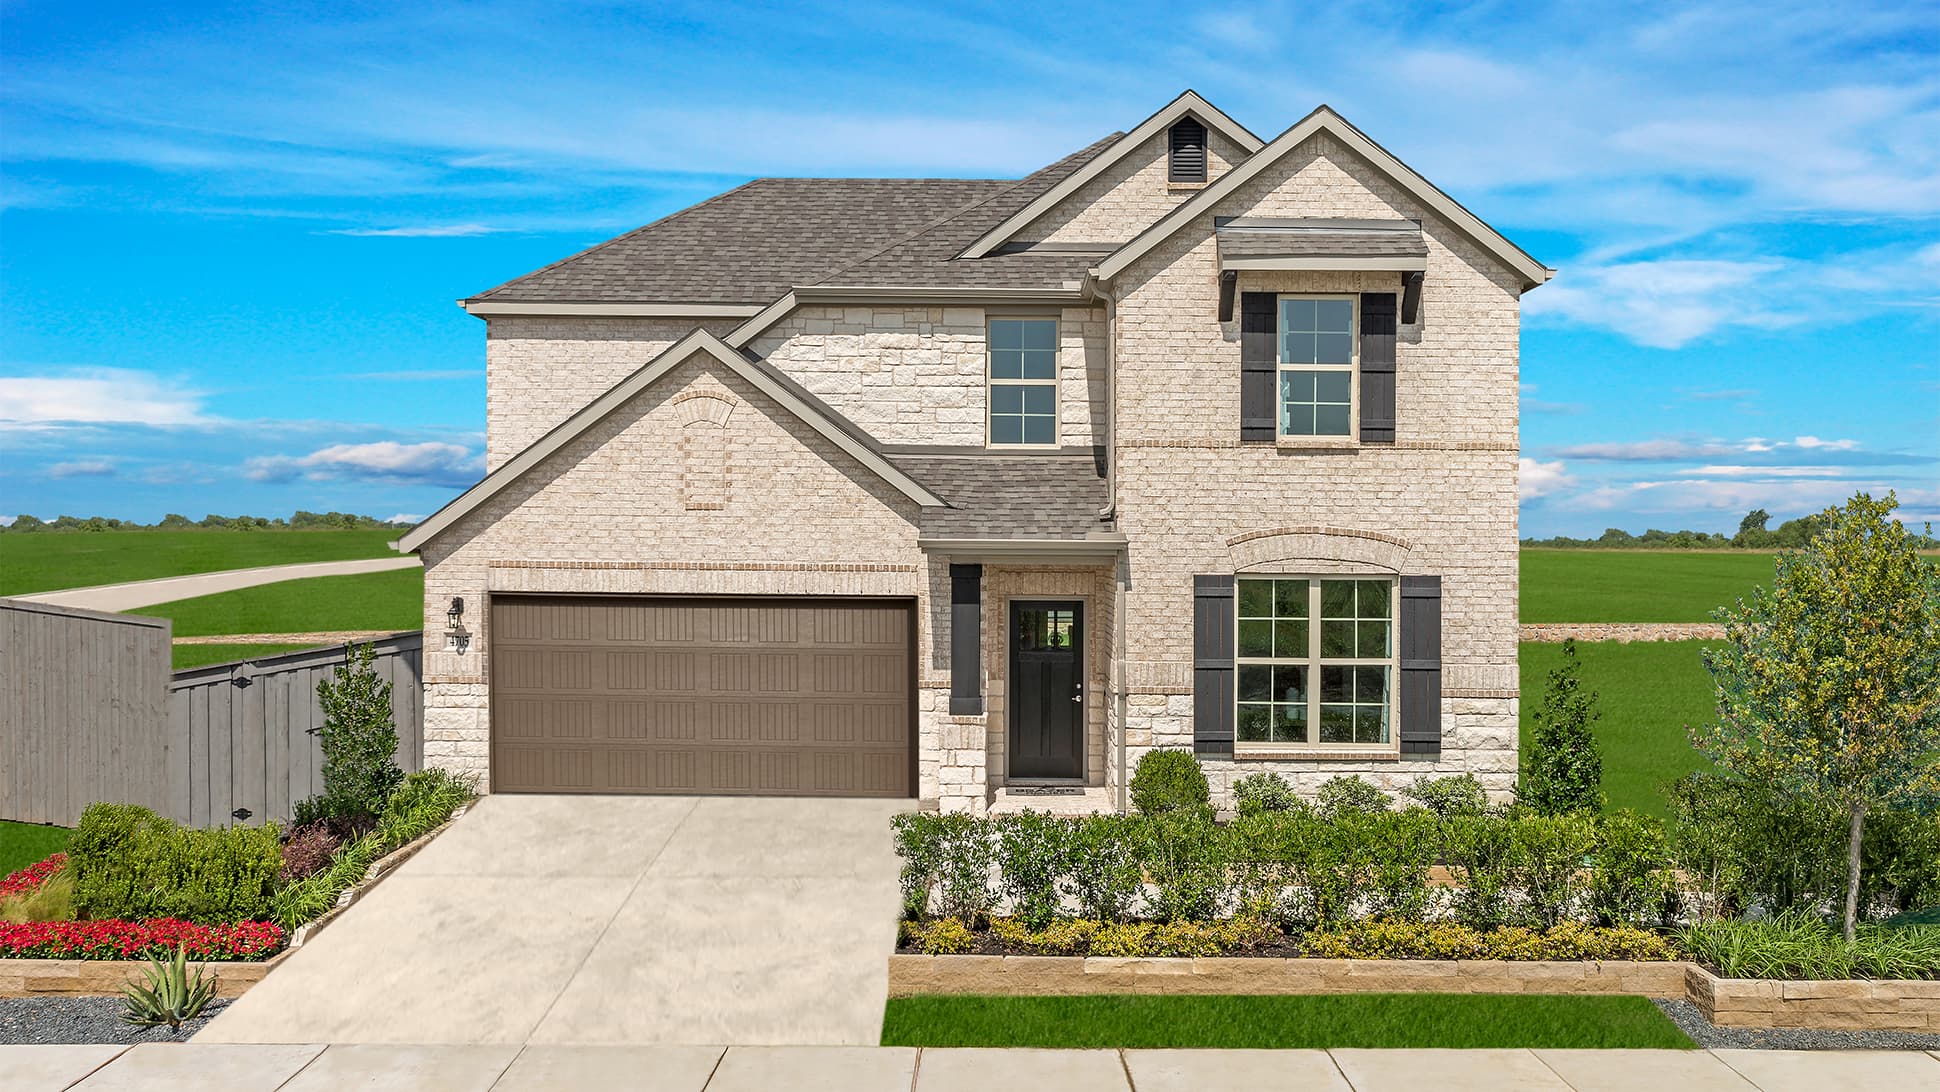 New two-story suburban house in Mansfield, TX with brick facade and landscaped front yard.